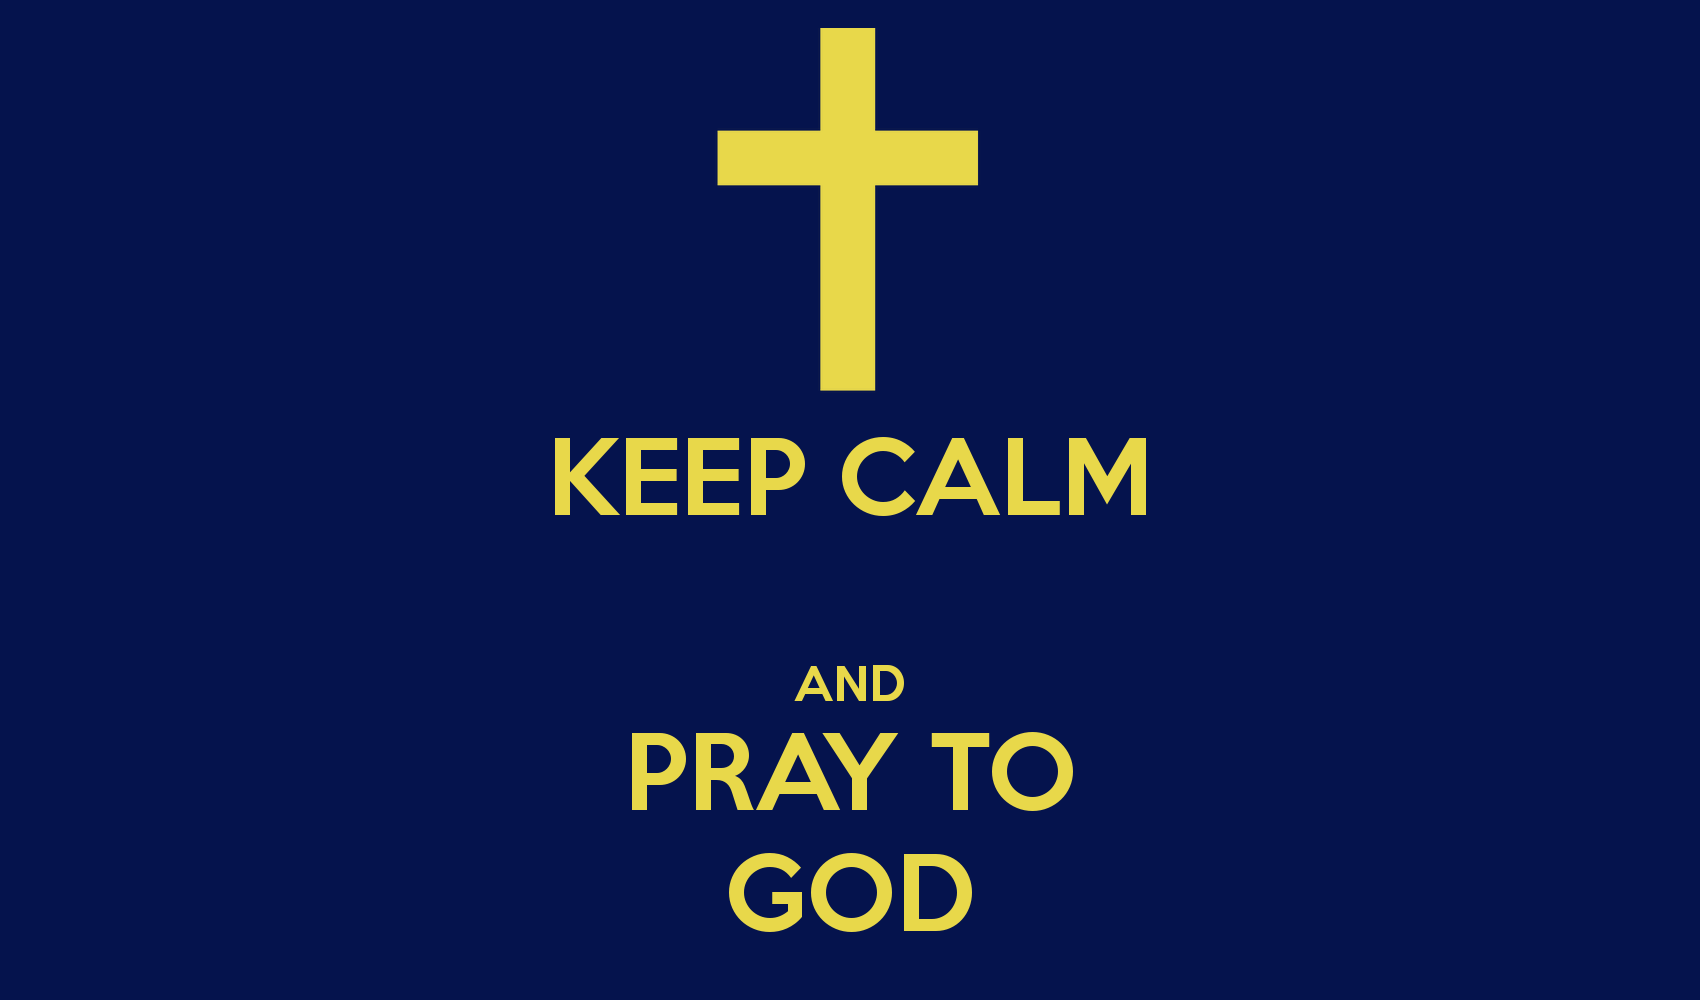 KEEP CALM AND PRAY TO GOD   KEEP CALM AND CARRY ON Image Generator